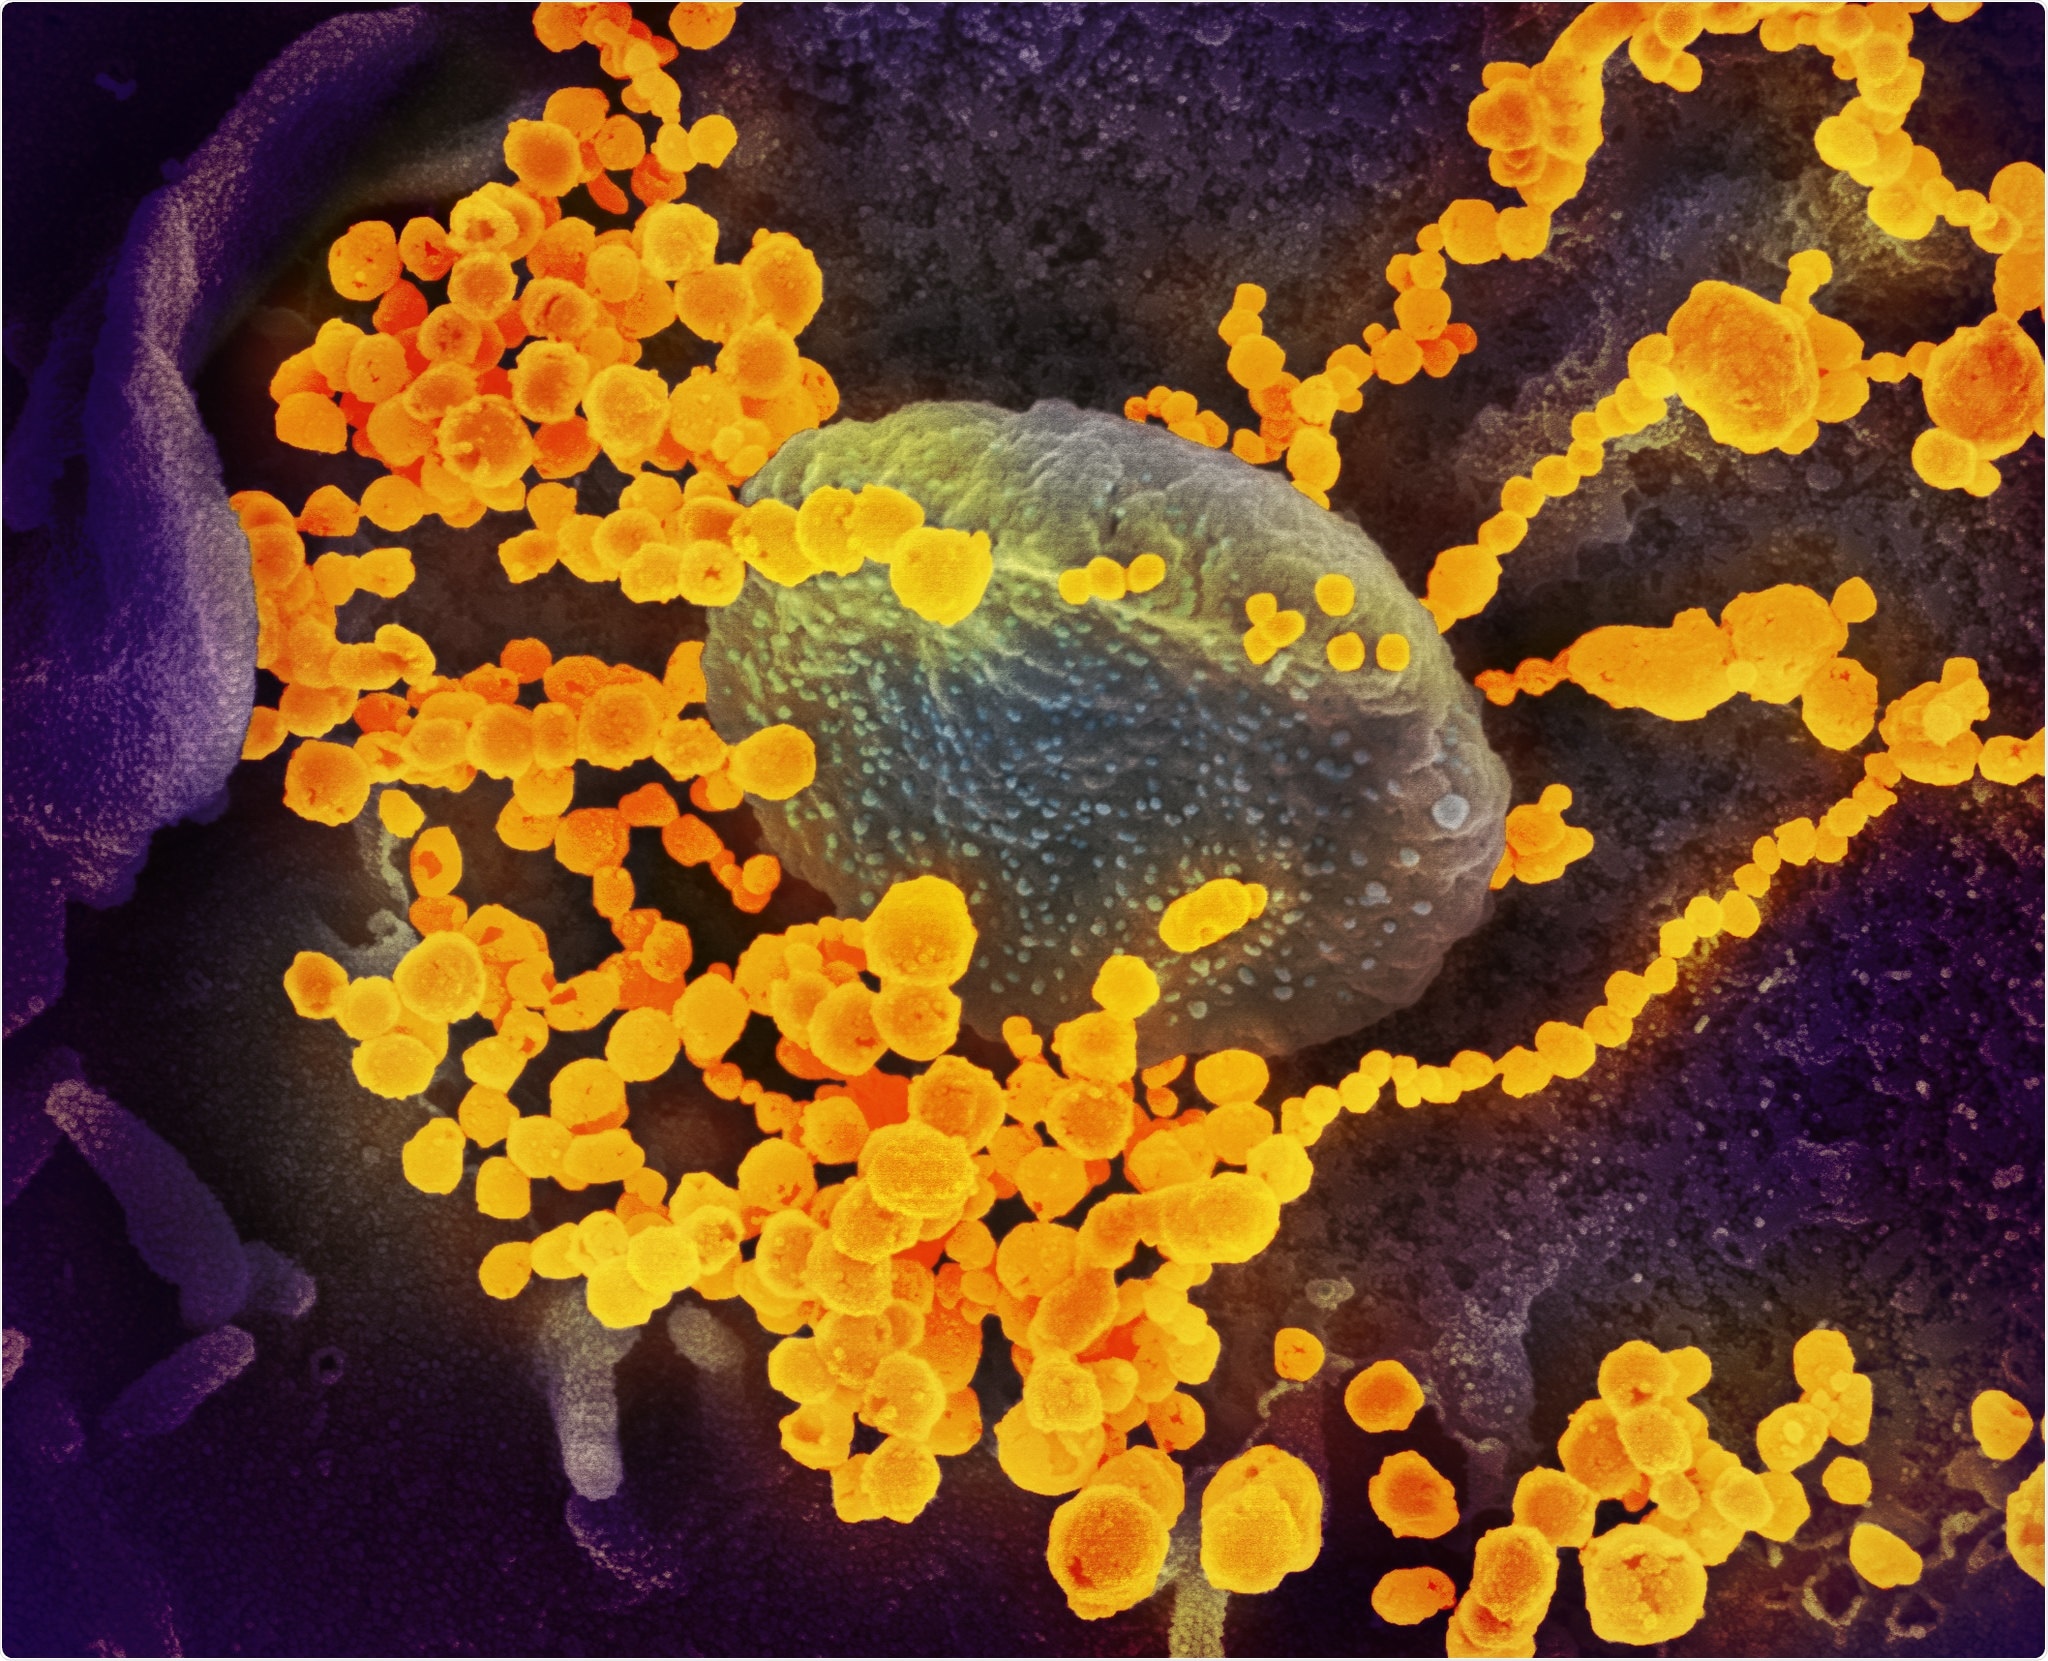 Novel Coronavirus SARS-CoV-2 This scanning electron microscope image shows SARS-CoV-2 (round gold objects) emerging from the surface of cells cultured in the lab. SARS-CoV-2, also known as 2019-nCoV, is the virus that causes COVID-19. The virus shown was isolated from a patient in the U.S. Image captured and colorized at NIAID